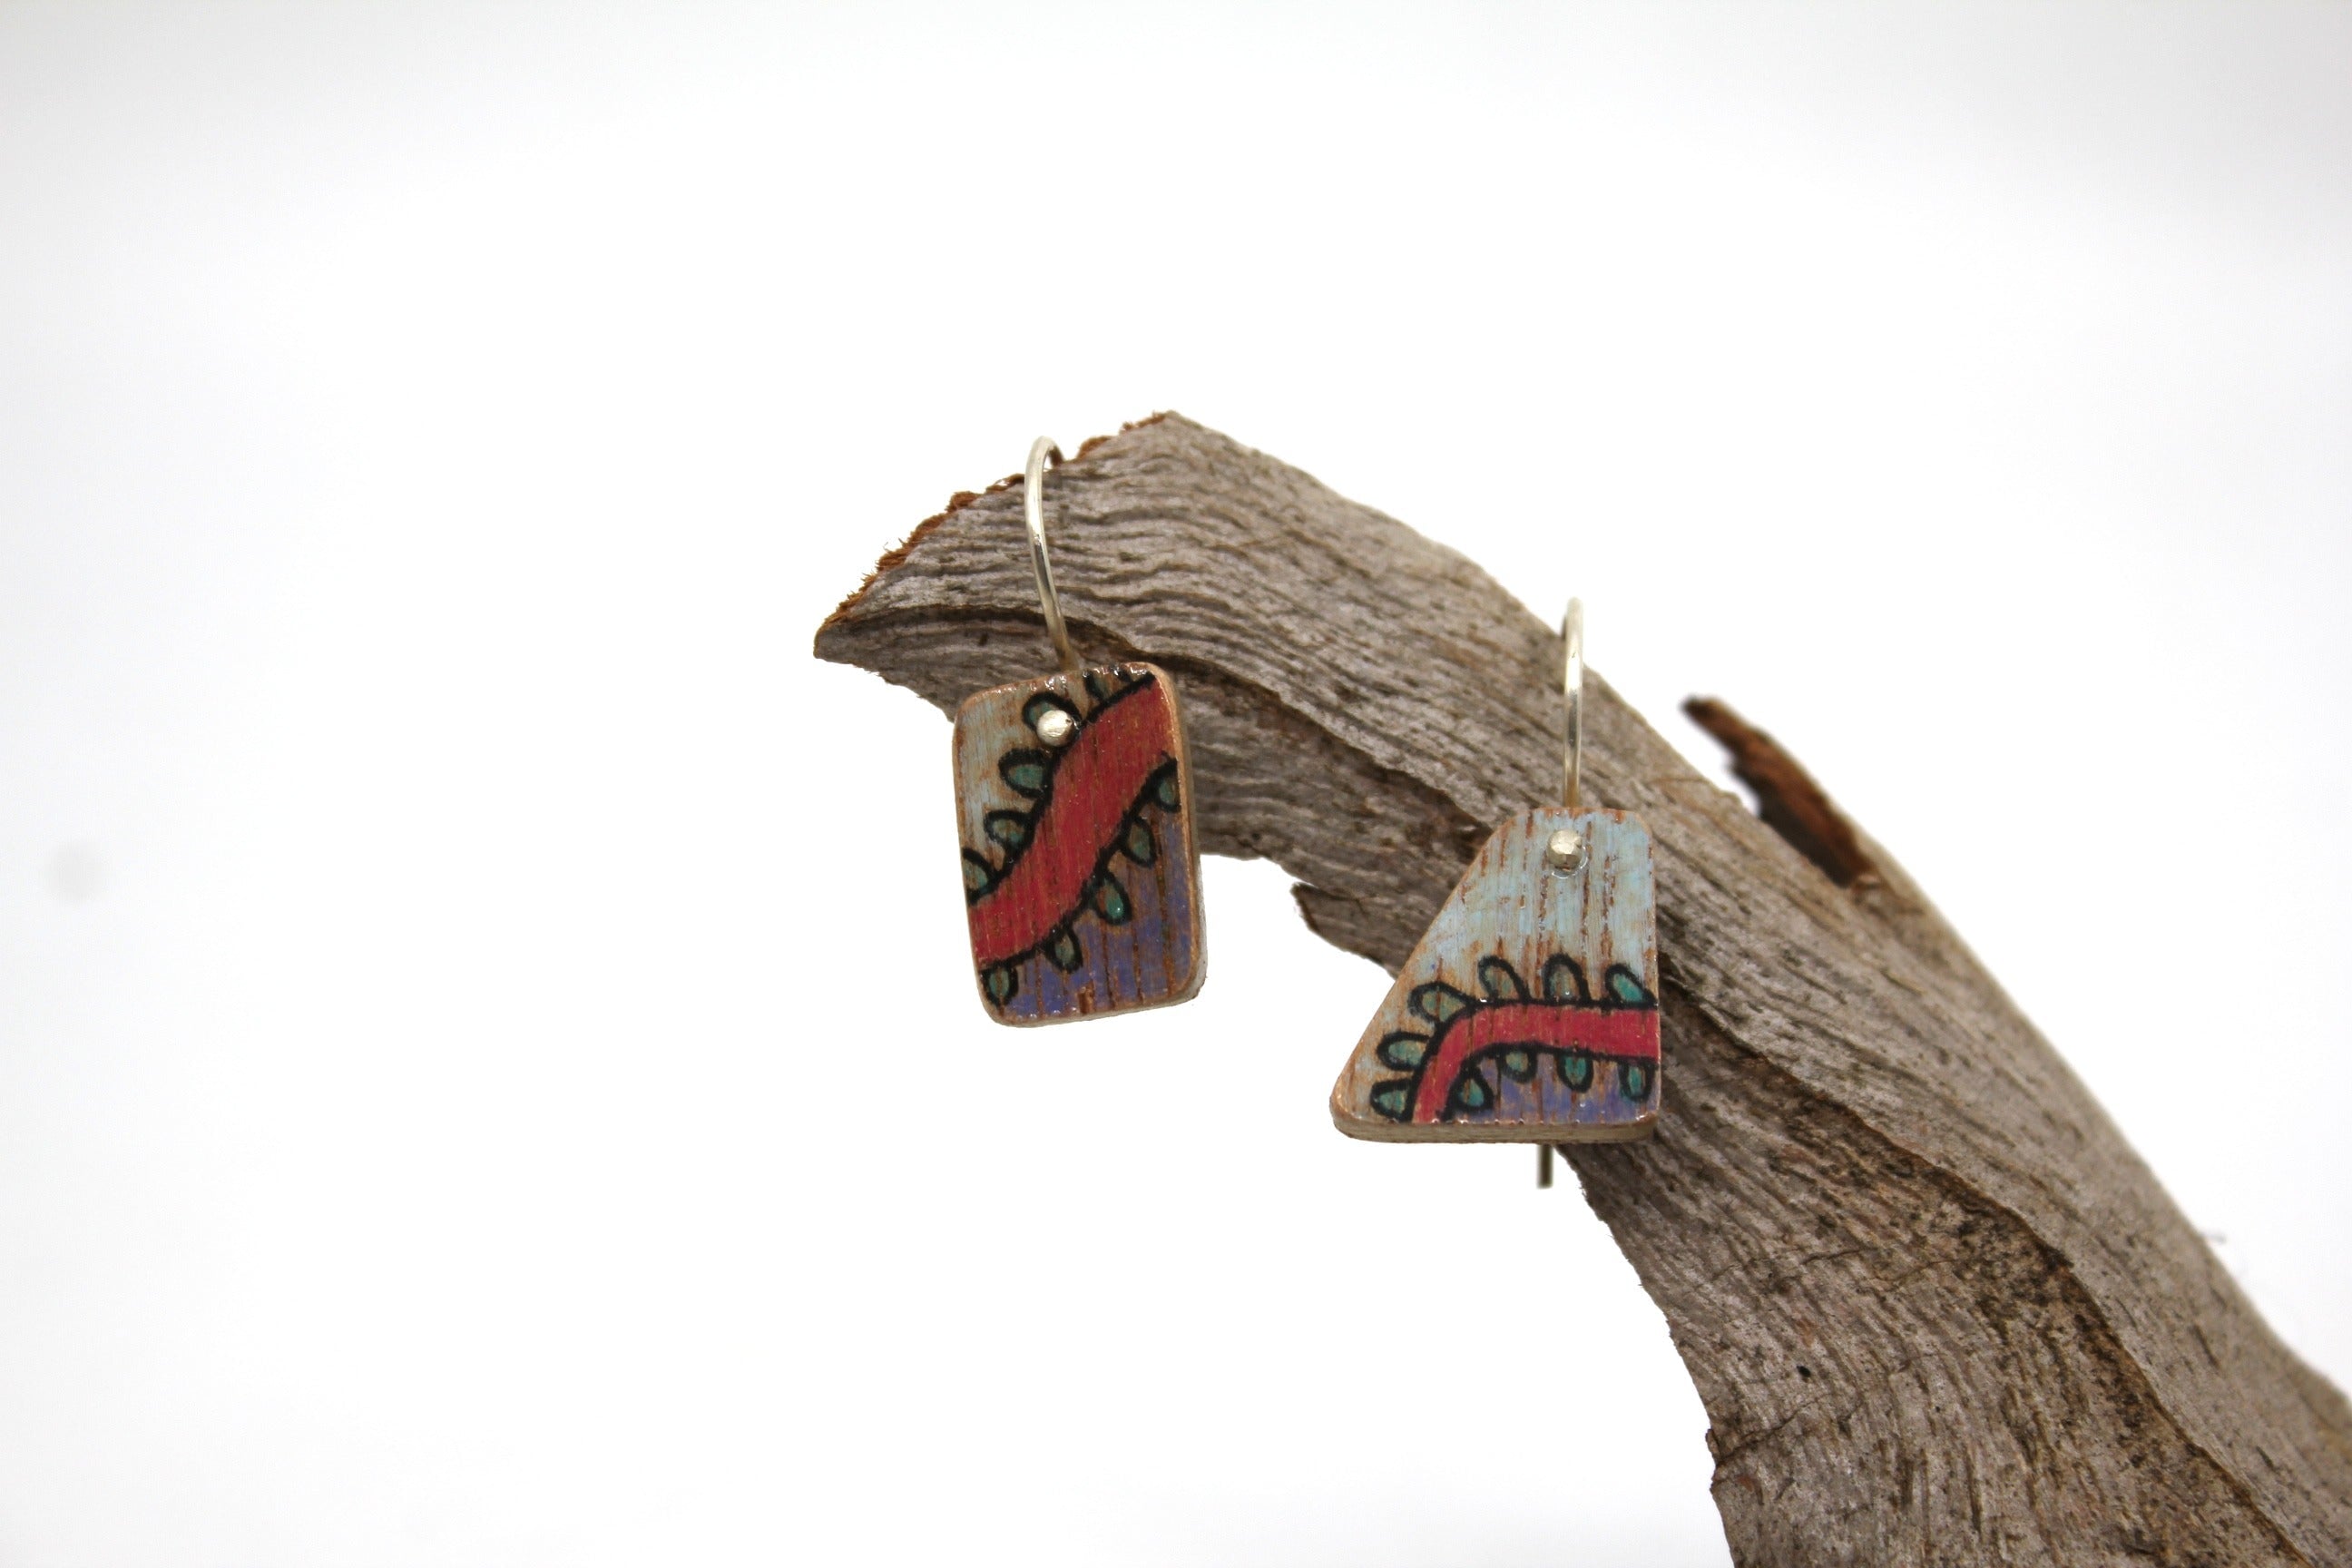 Painted Ply Earrings with Small Silver Hooks